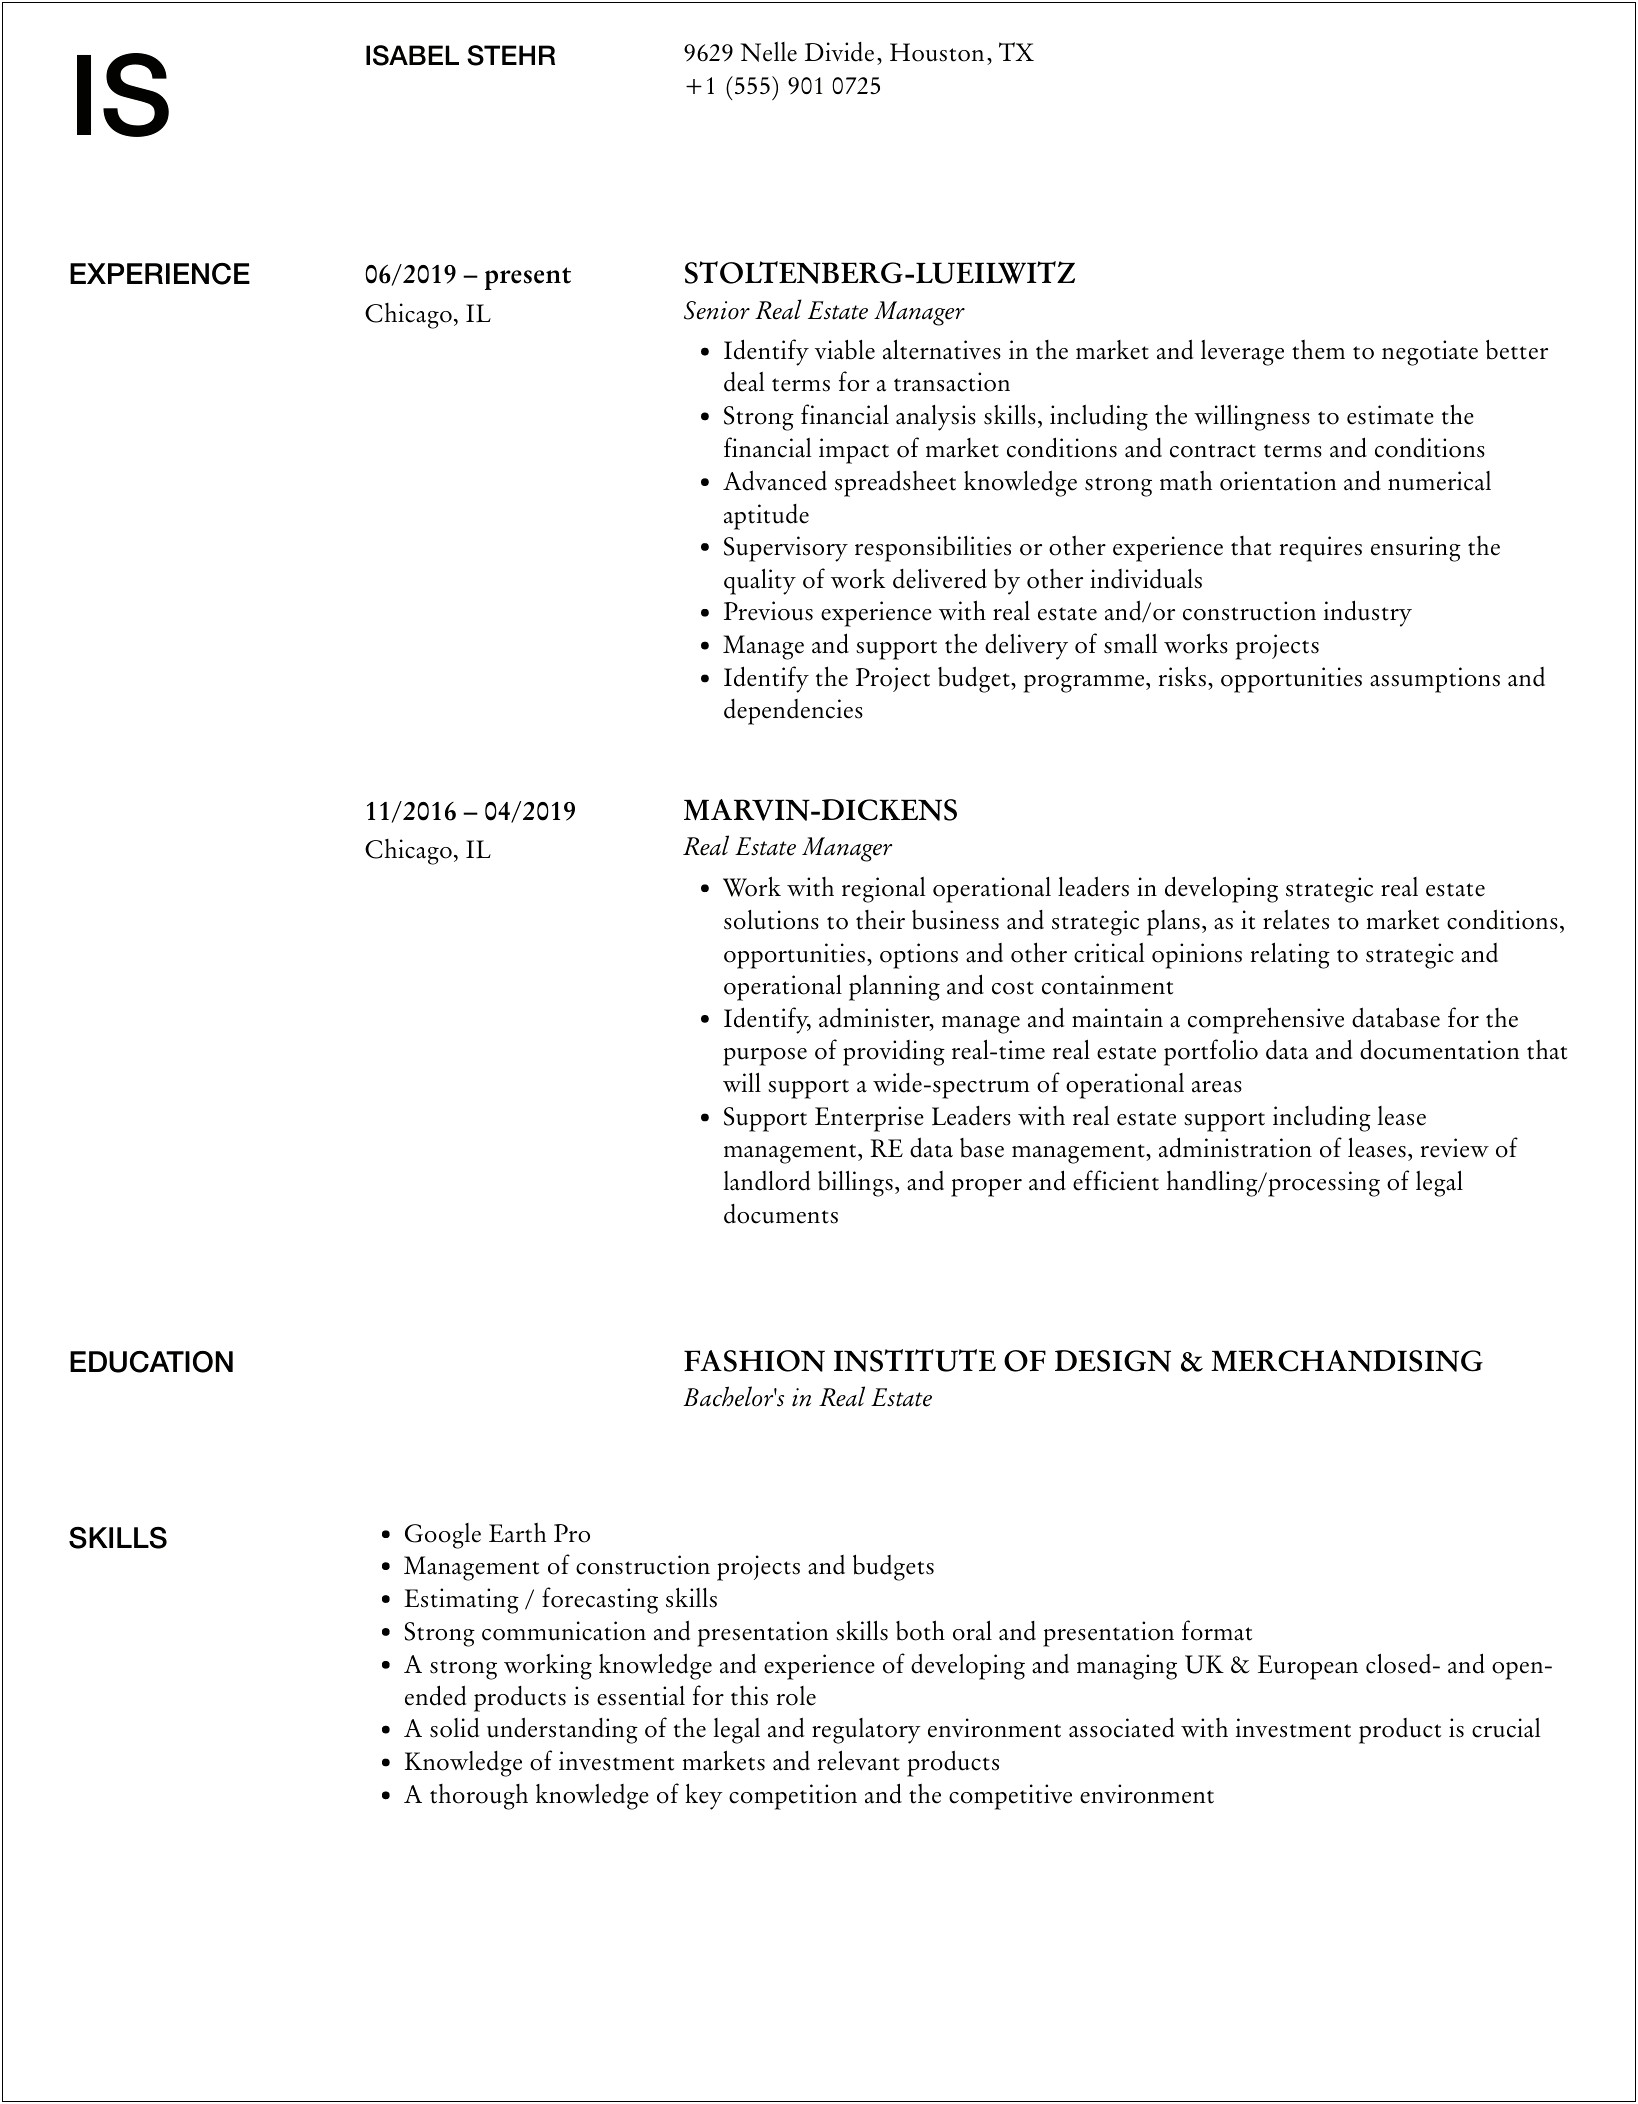 Real Estate Sales Manager Resume Objective